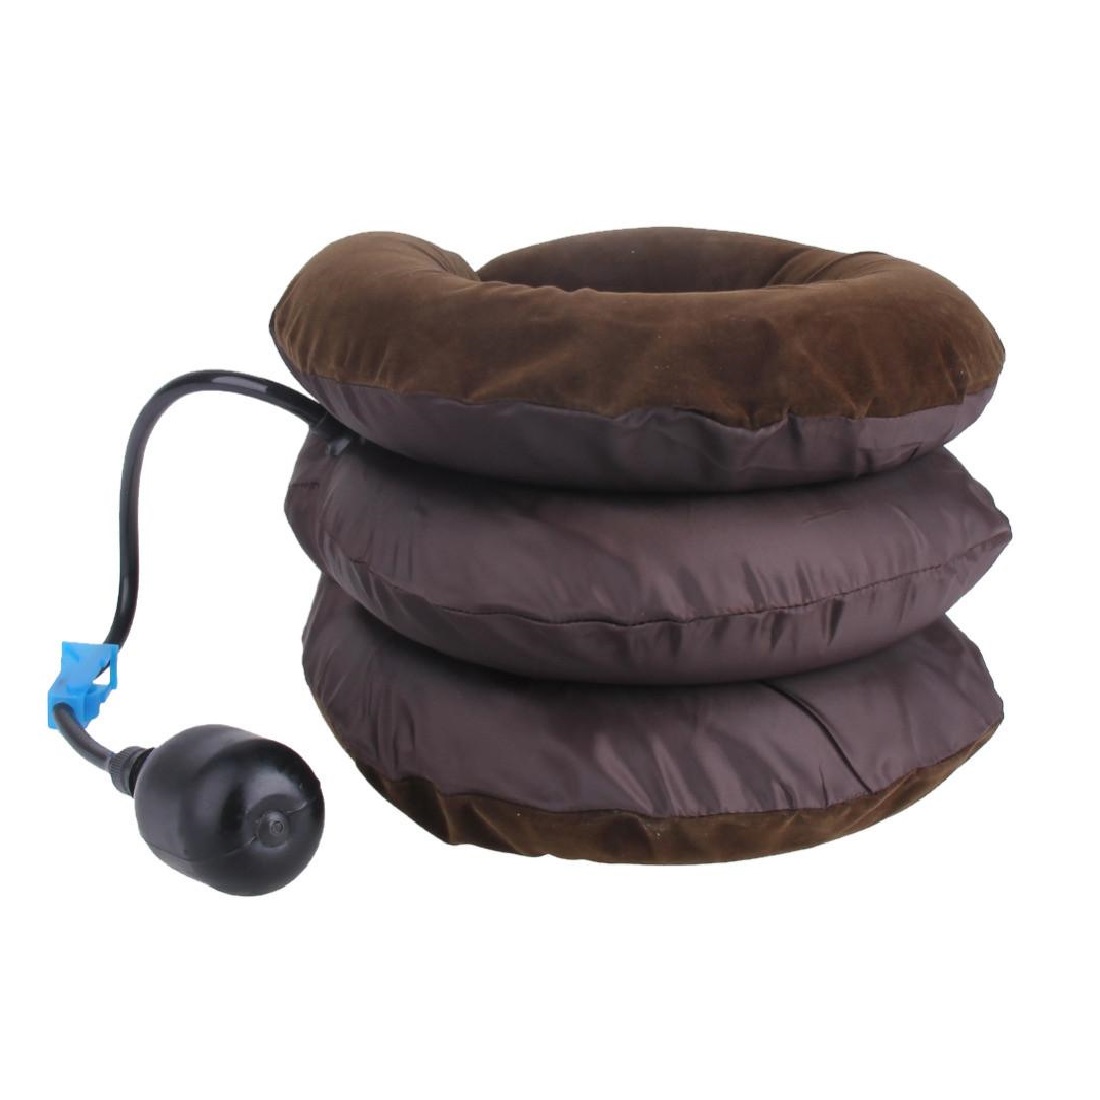 GHK H68 Inflatable Cervical Neck Traction Pillow Adjustable Portable & Compact Three Layer Neck & Shoulder Pain Relief Massager, Brown